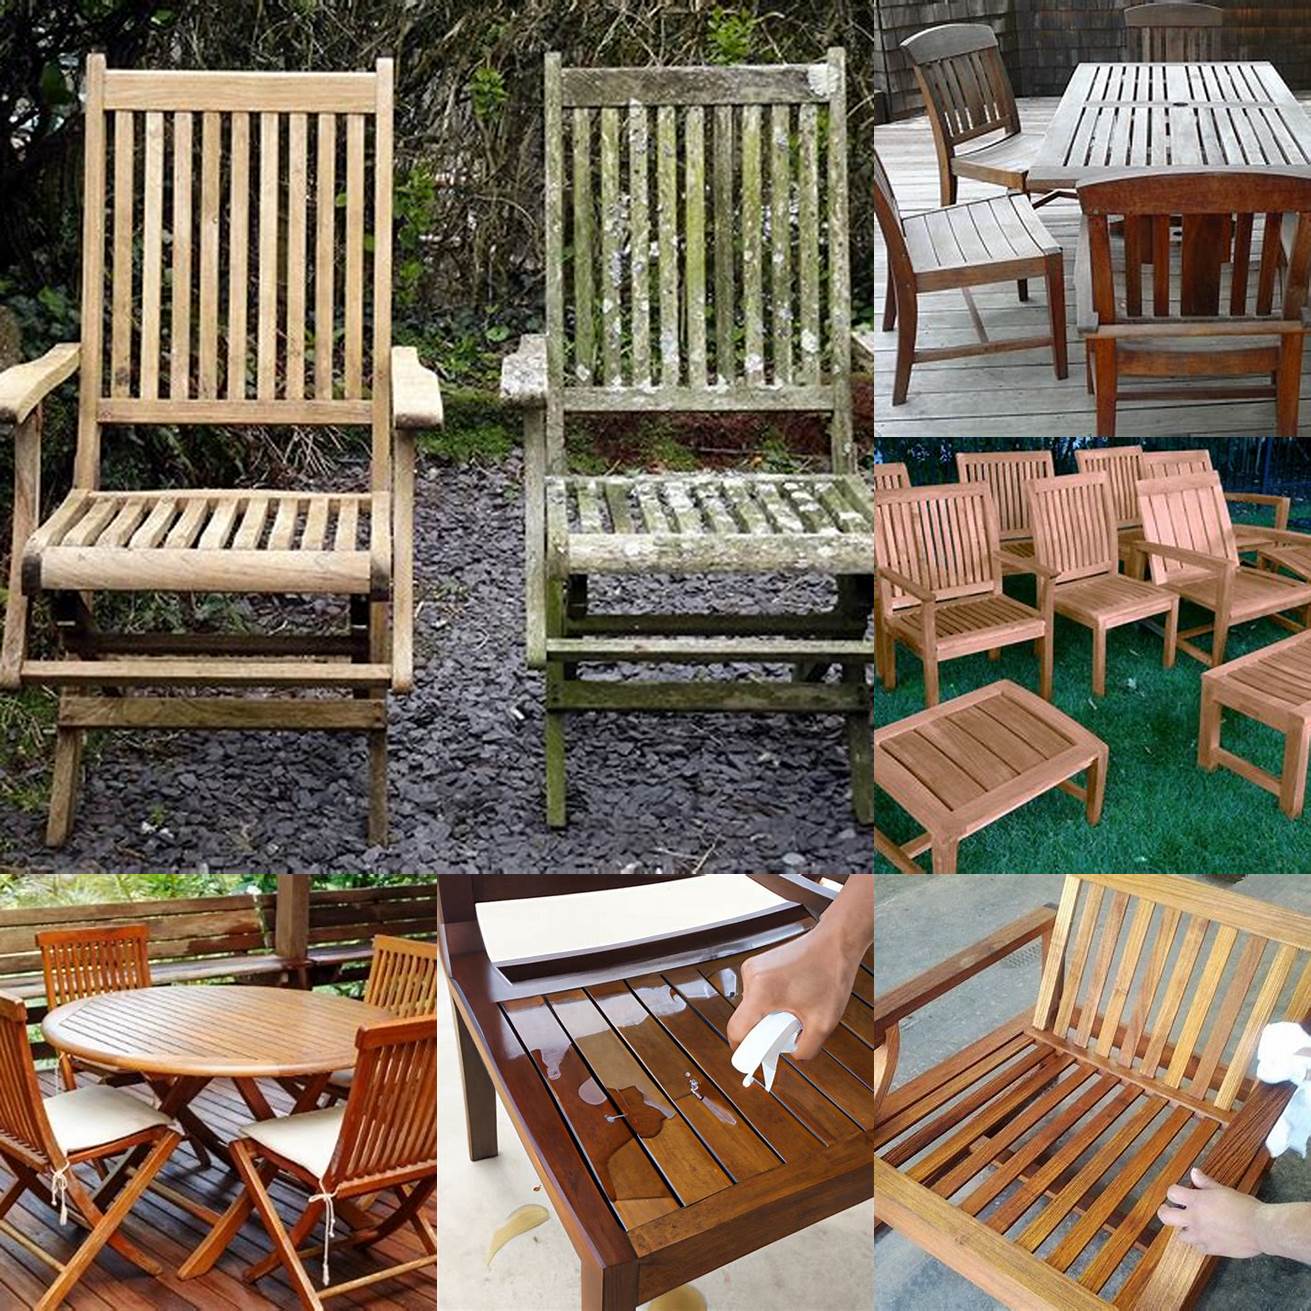 Maintaining Teak Furniture for Long-Term Use